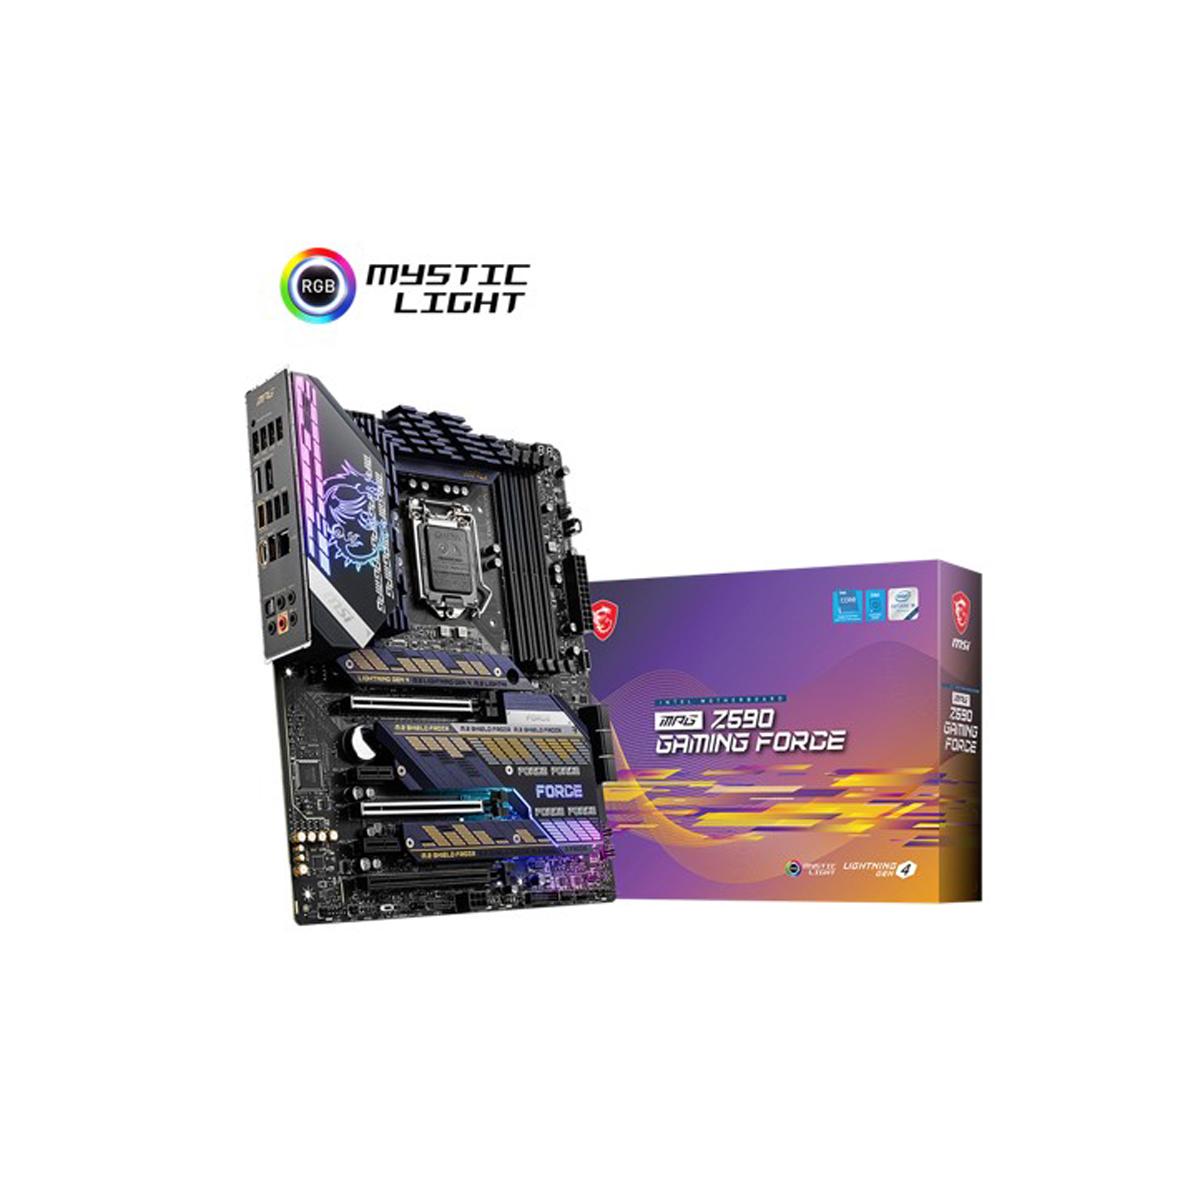 MPG Z590 GAMING FORCE MOTHERBOARD MSI (MPG Z590 GAMING FORCE) SOCKET 1200, 4* DDR4 5333, HDMI, DP, CROSSFIRE,  ATX